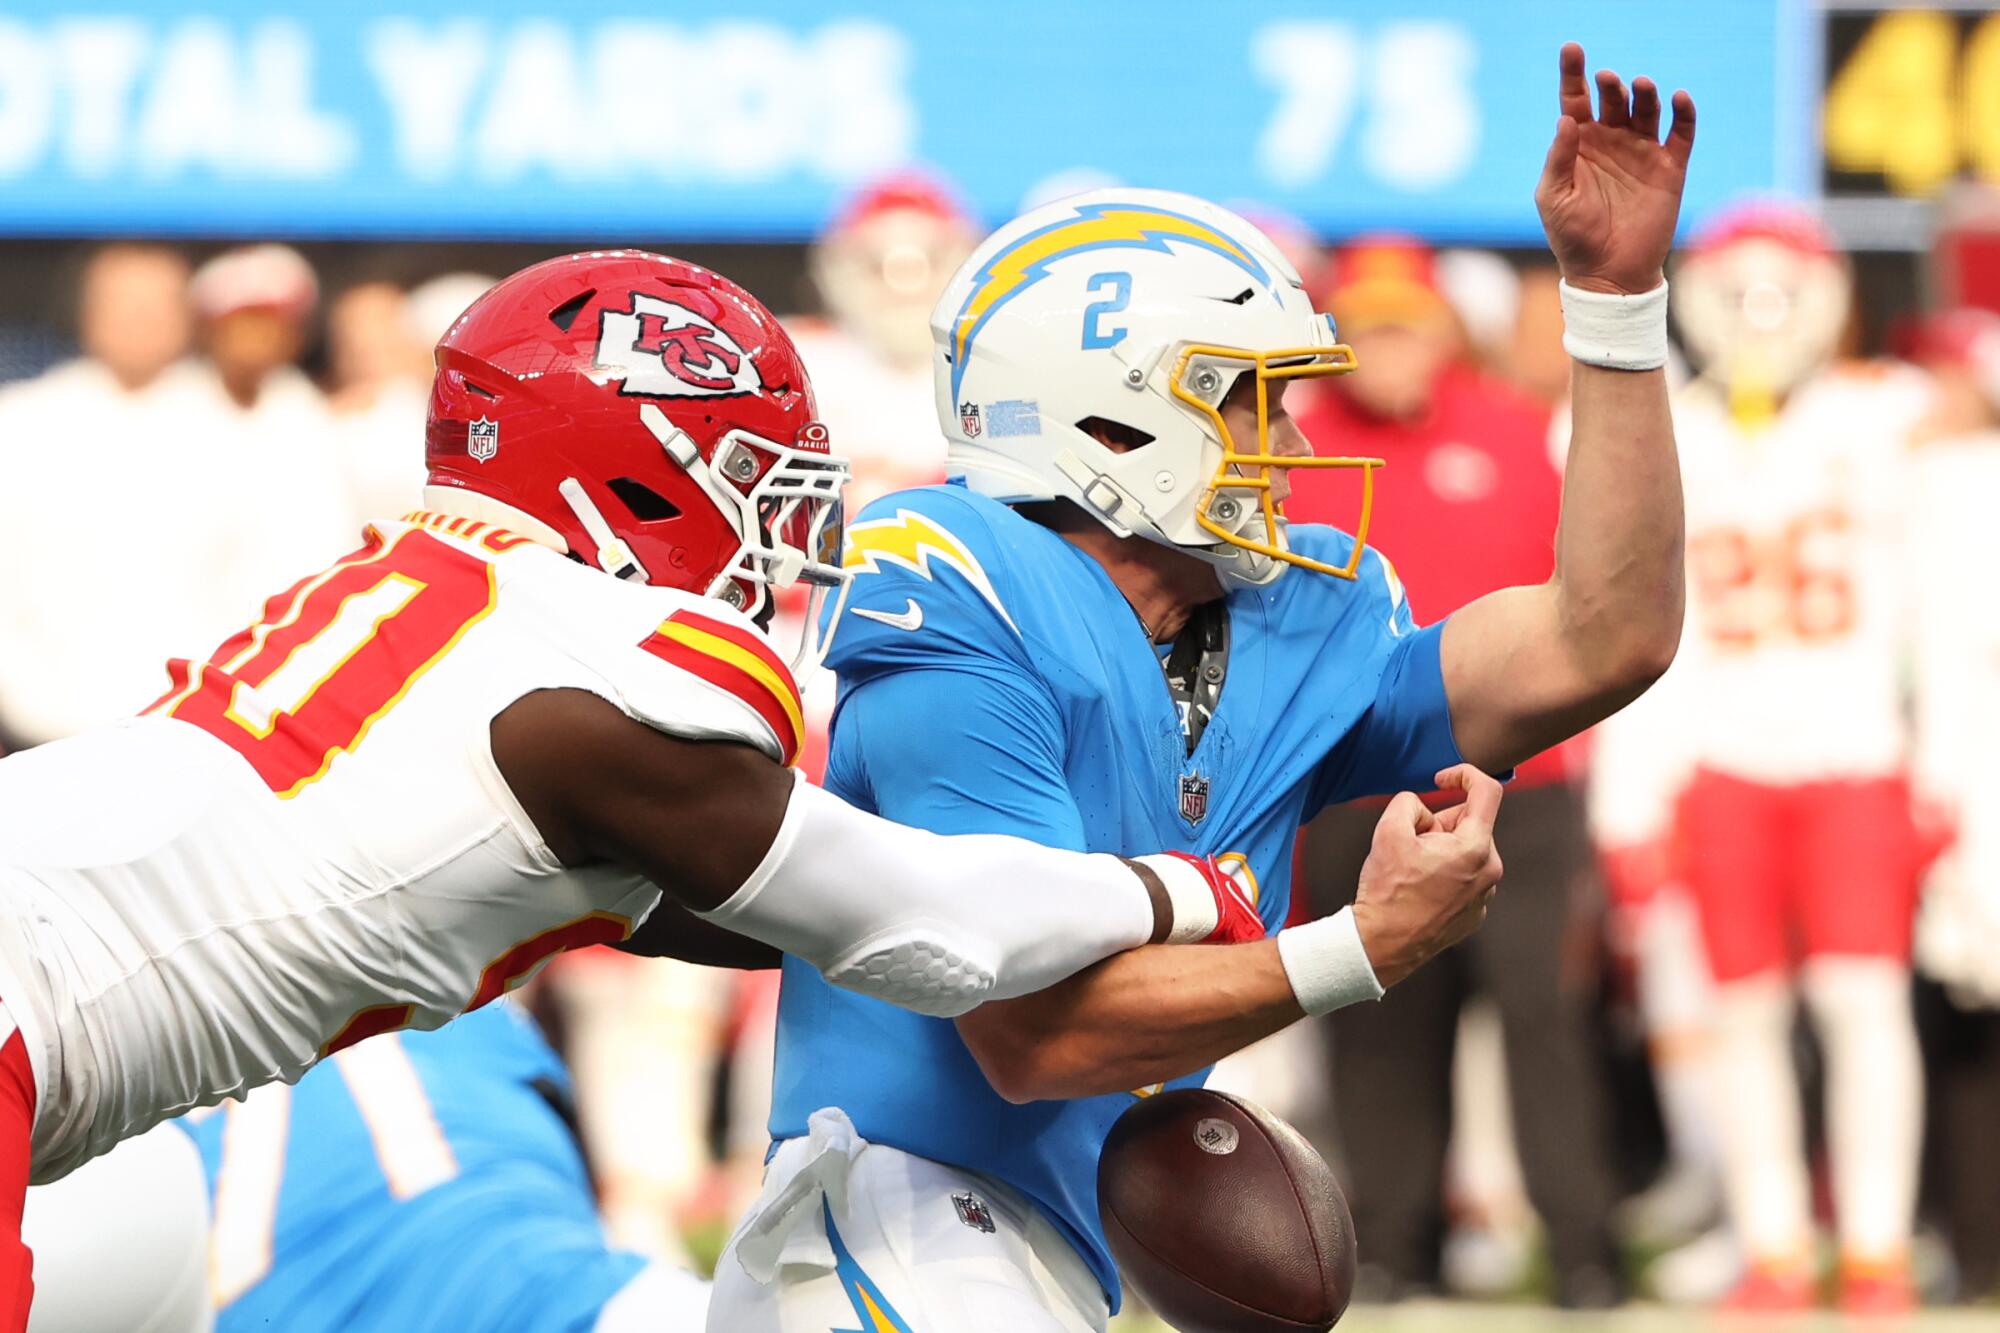 Chargers lose to Chiefs, will have No. 5 pick in NFL draft - Los